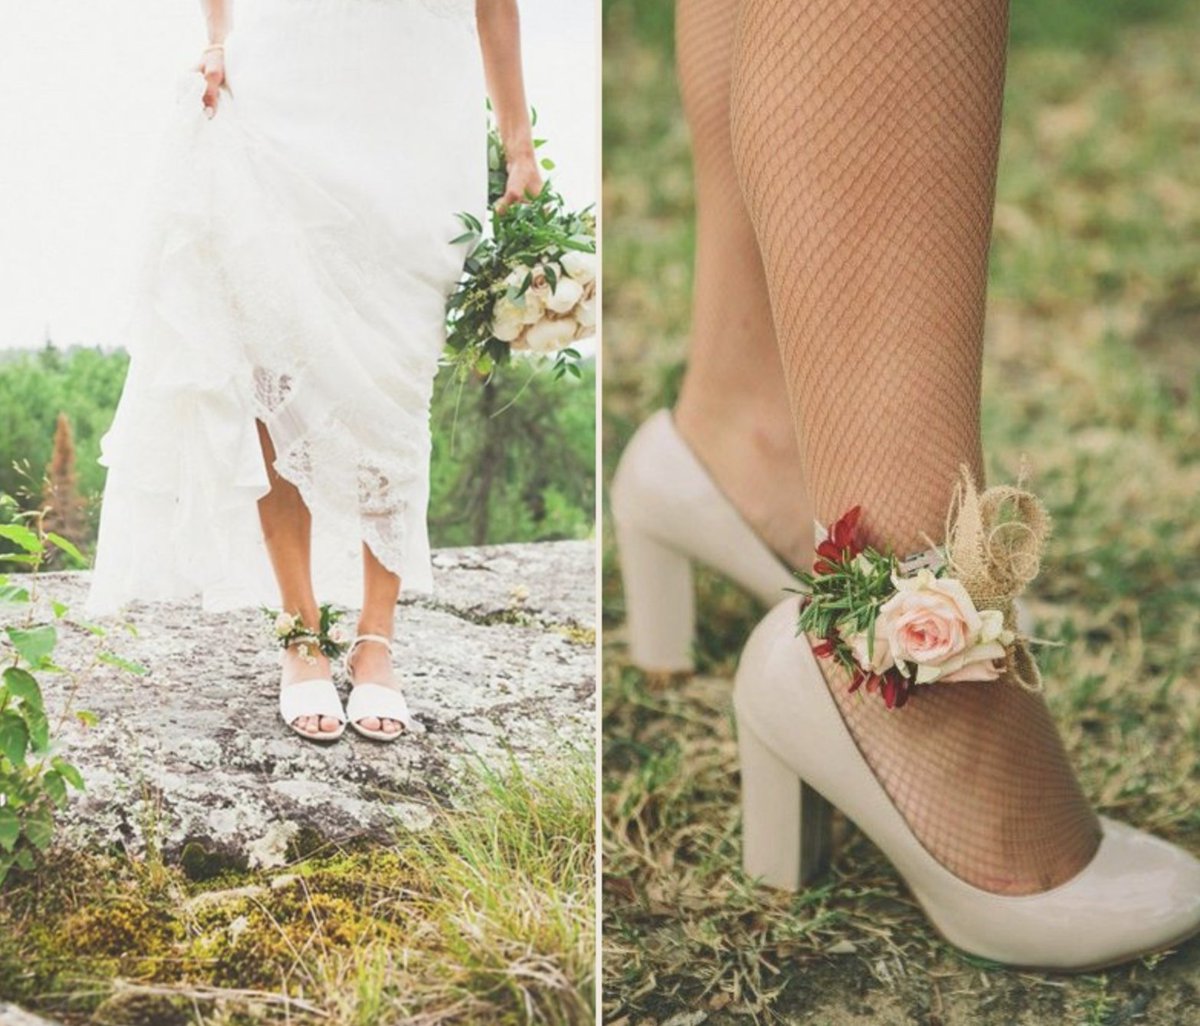 Have you seen this beautiful trend? Floral anklets?! How beautiful are these 😍 Check out our blog for some inspo on this idea!
-
#FiftyFlowers #DIYWeddingFlowers #DIYFlowers #DIYWedding #FlowerAnklet #FloralAnklet
-
bit.ly/3tZrieW